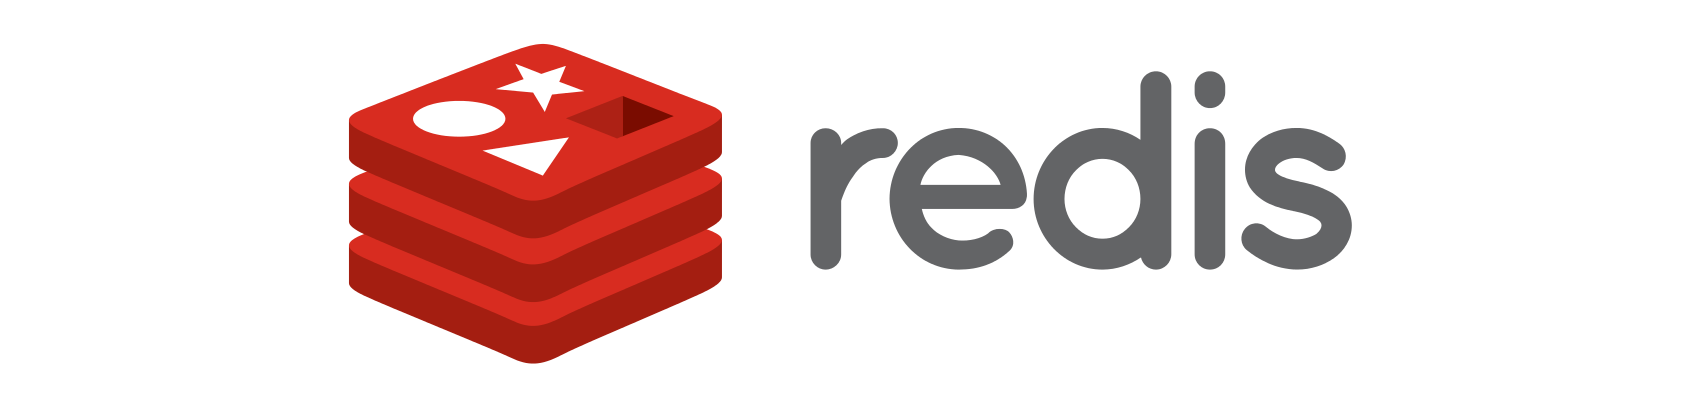 Caching API responses with Redis for faster endpoints feature image